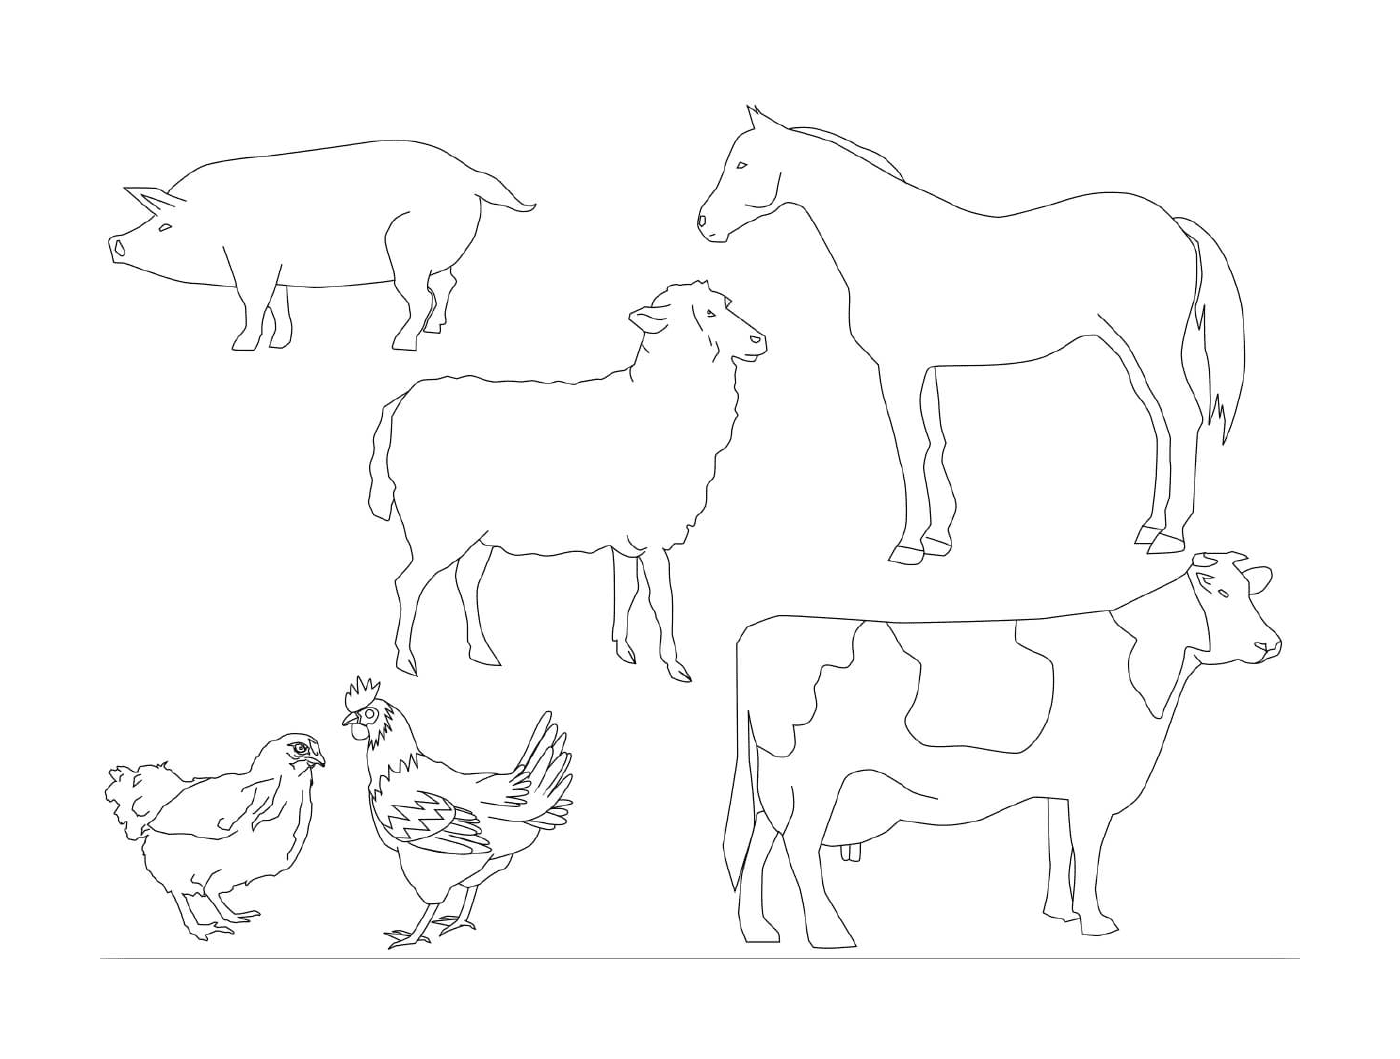  many animals that can be drawn 